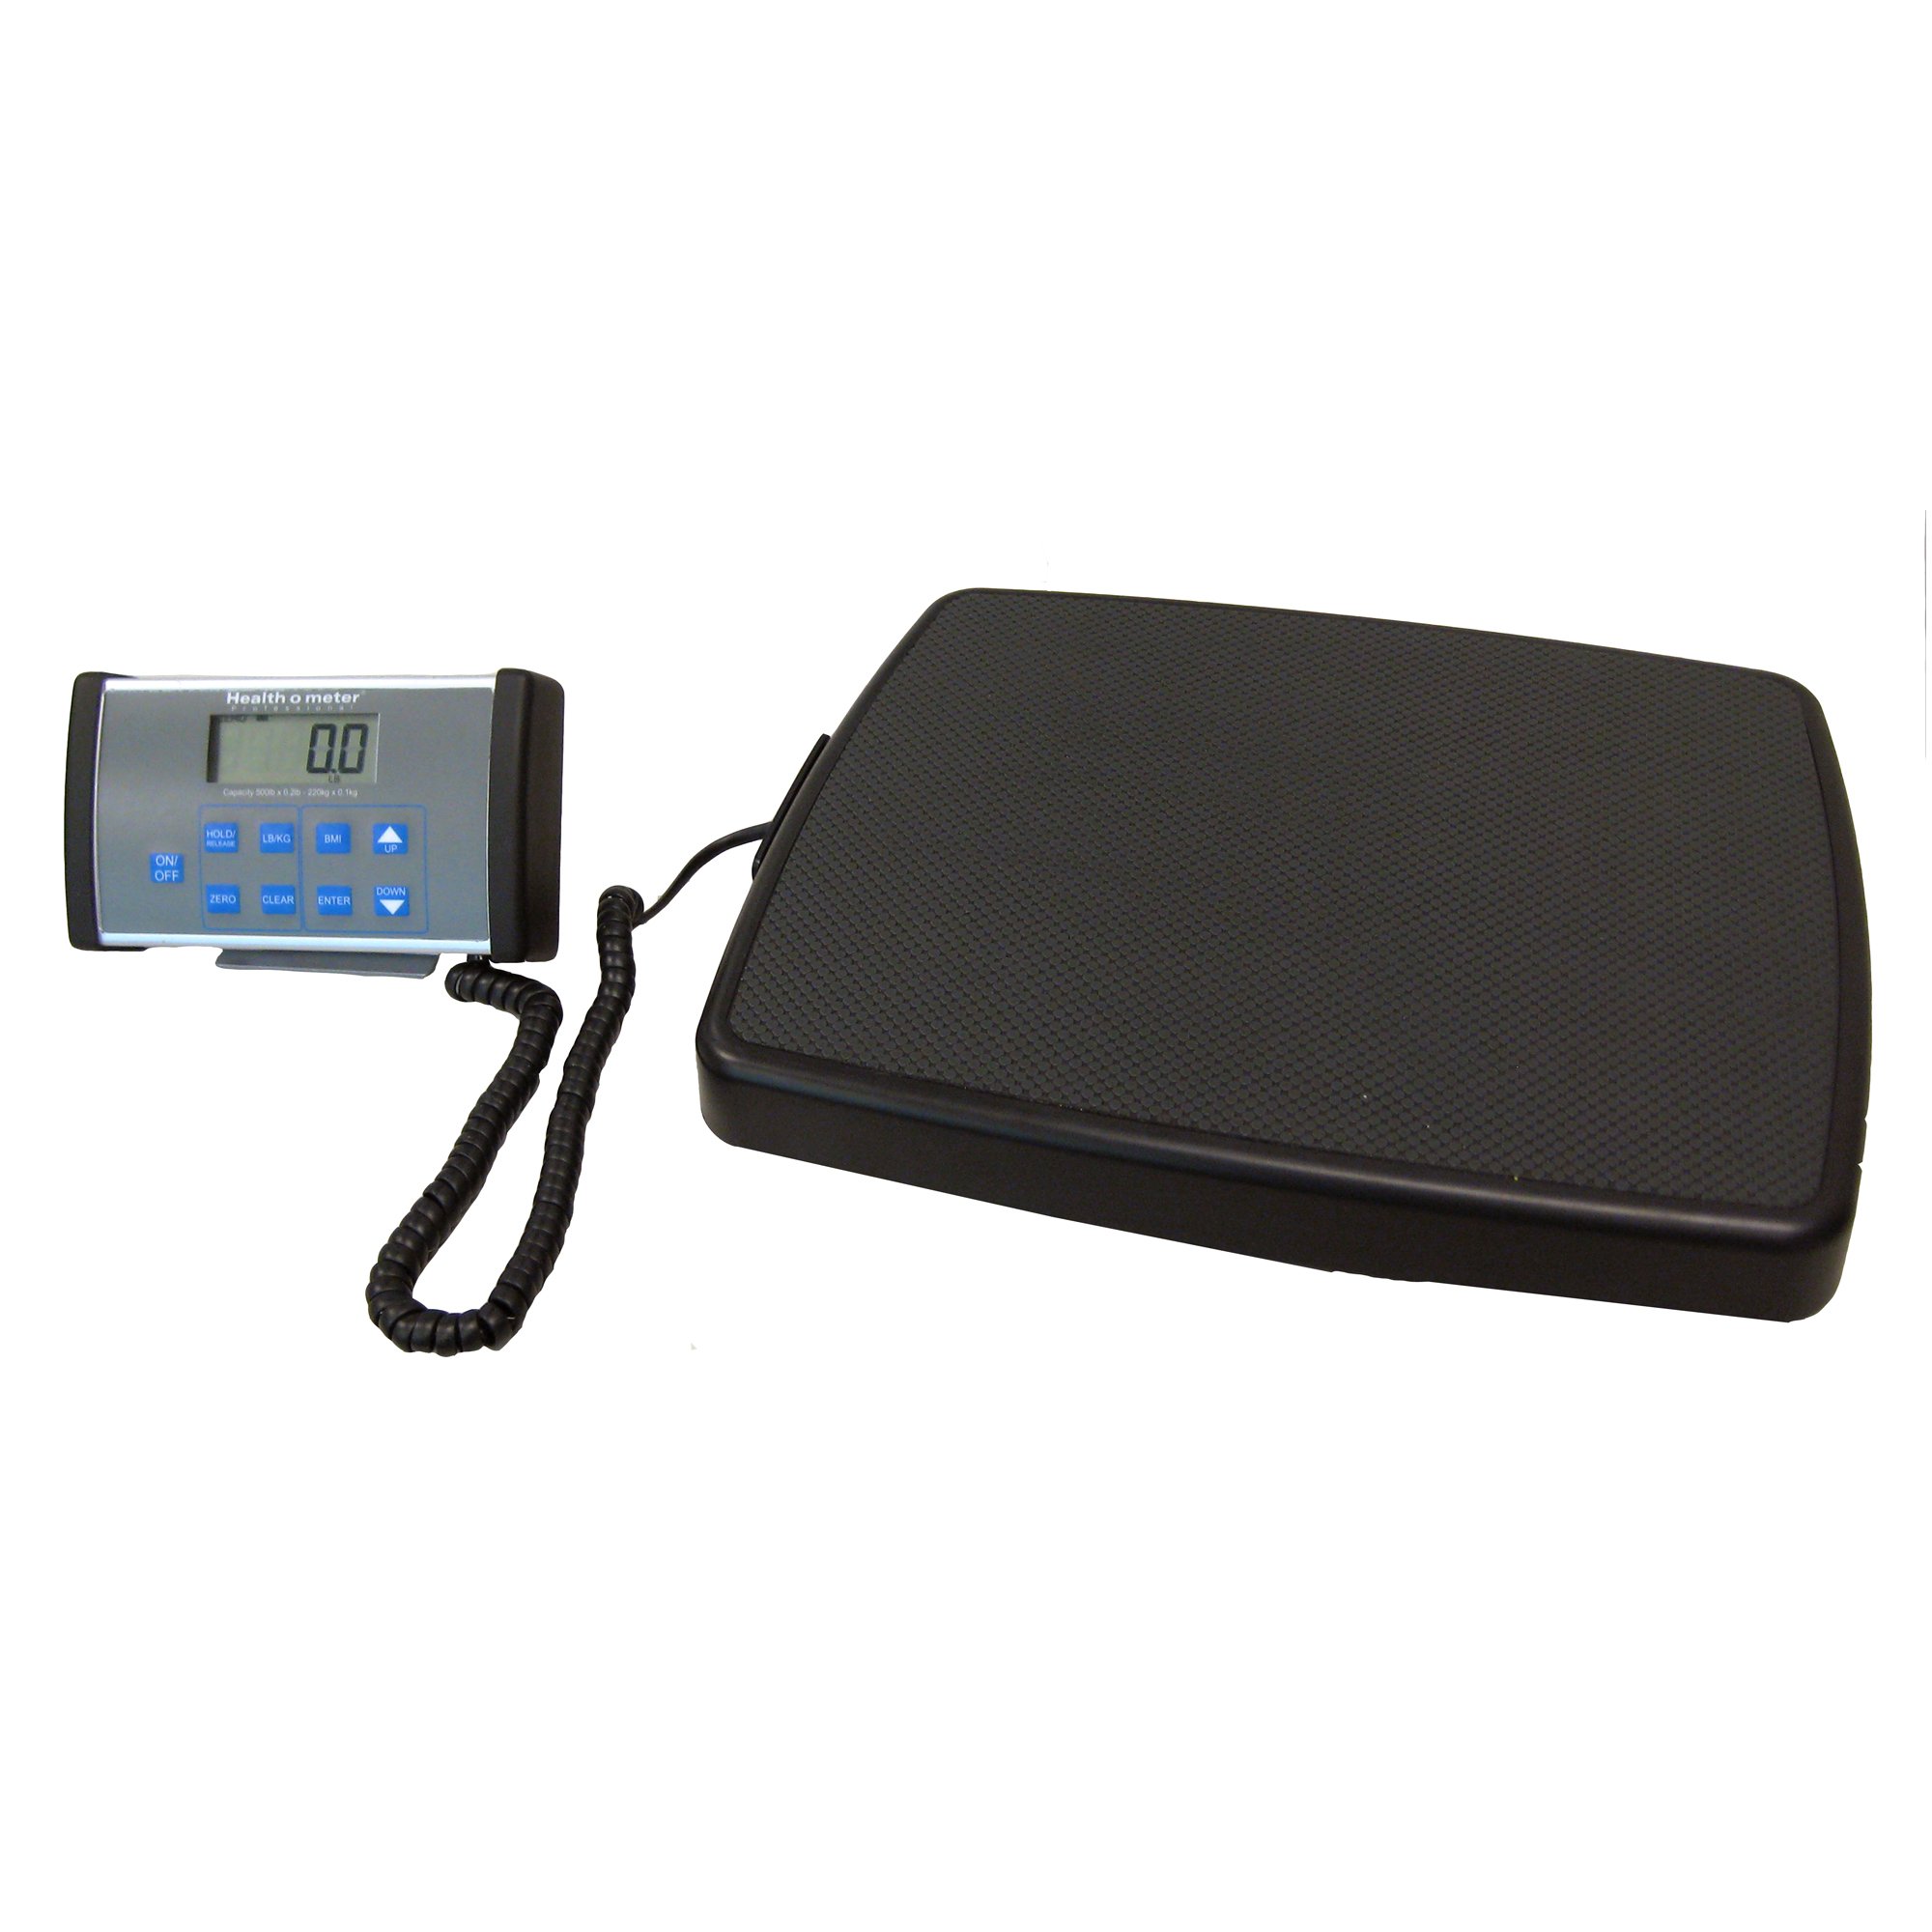 Tuffiom 220lb Weight Electronic Platform Scale,Digital Floor Heavy Duty Folding Scales,Stainless Steel High-Definition LCD Display, Perfect for Postal